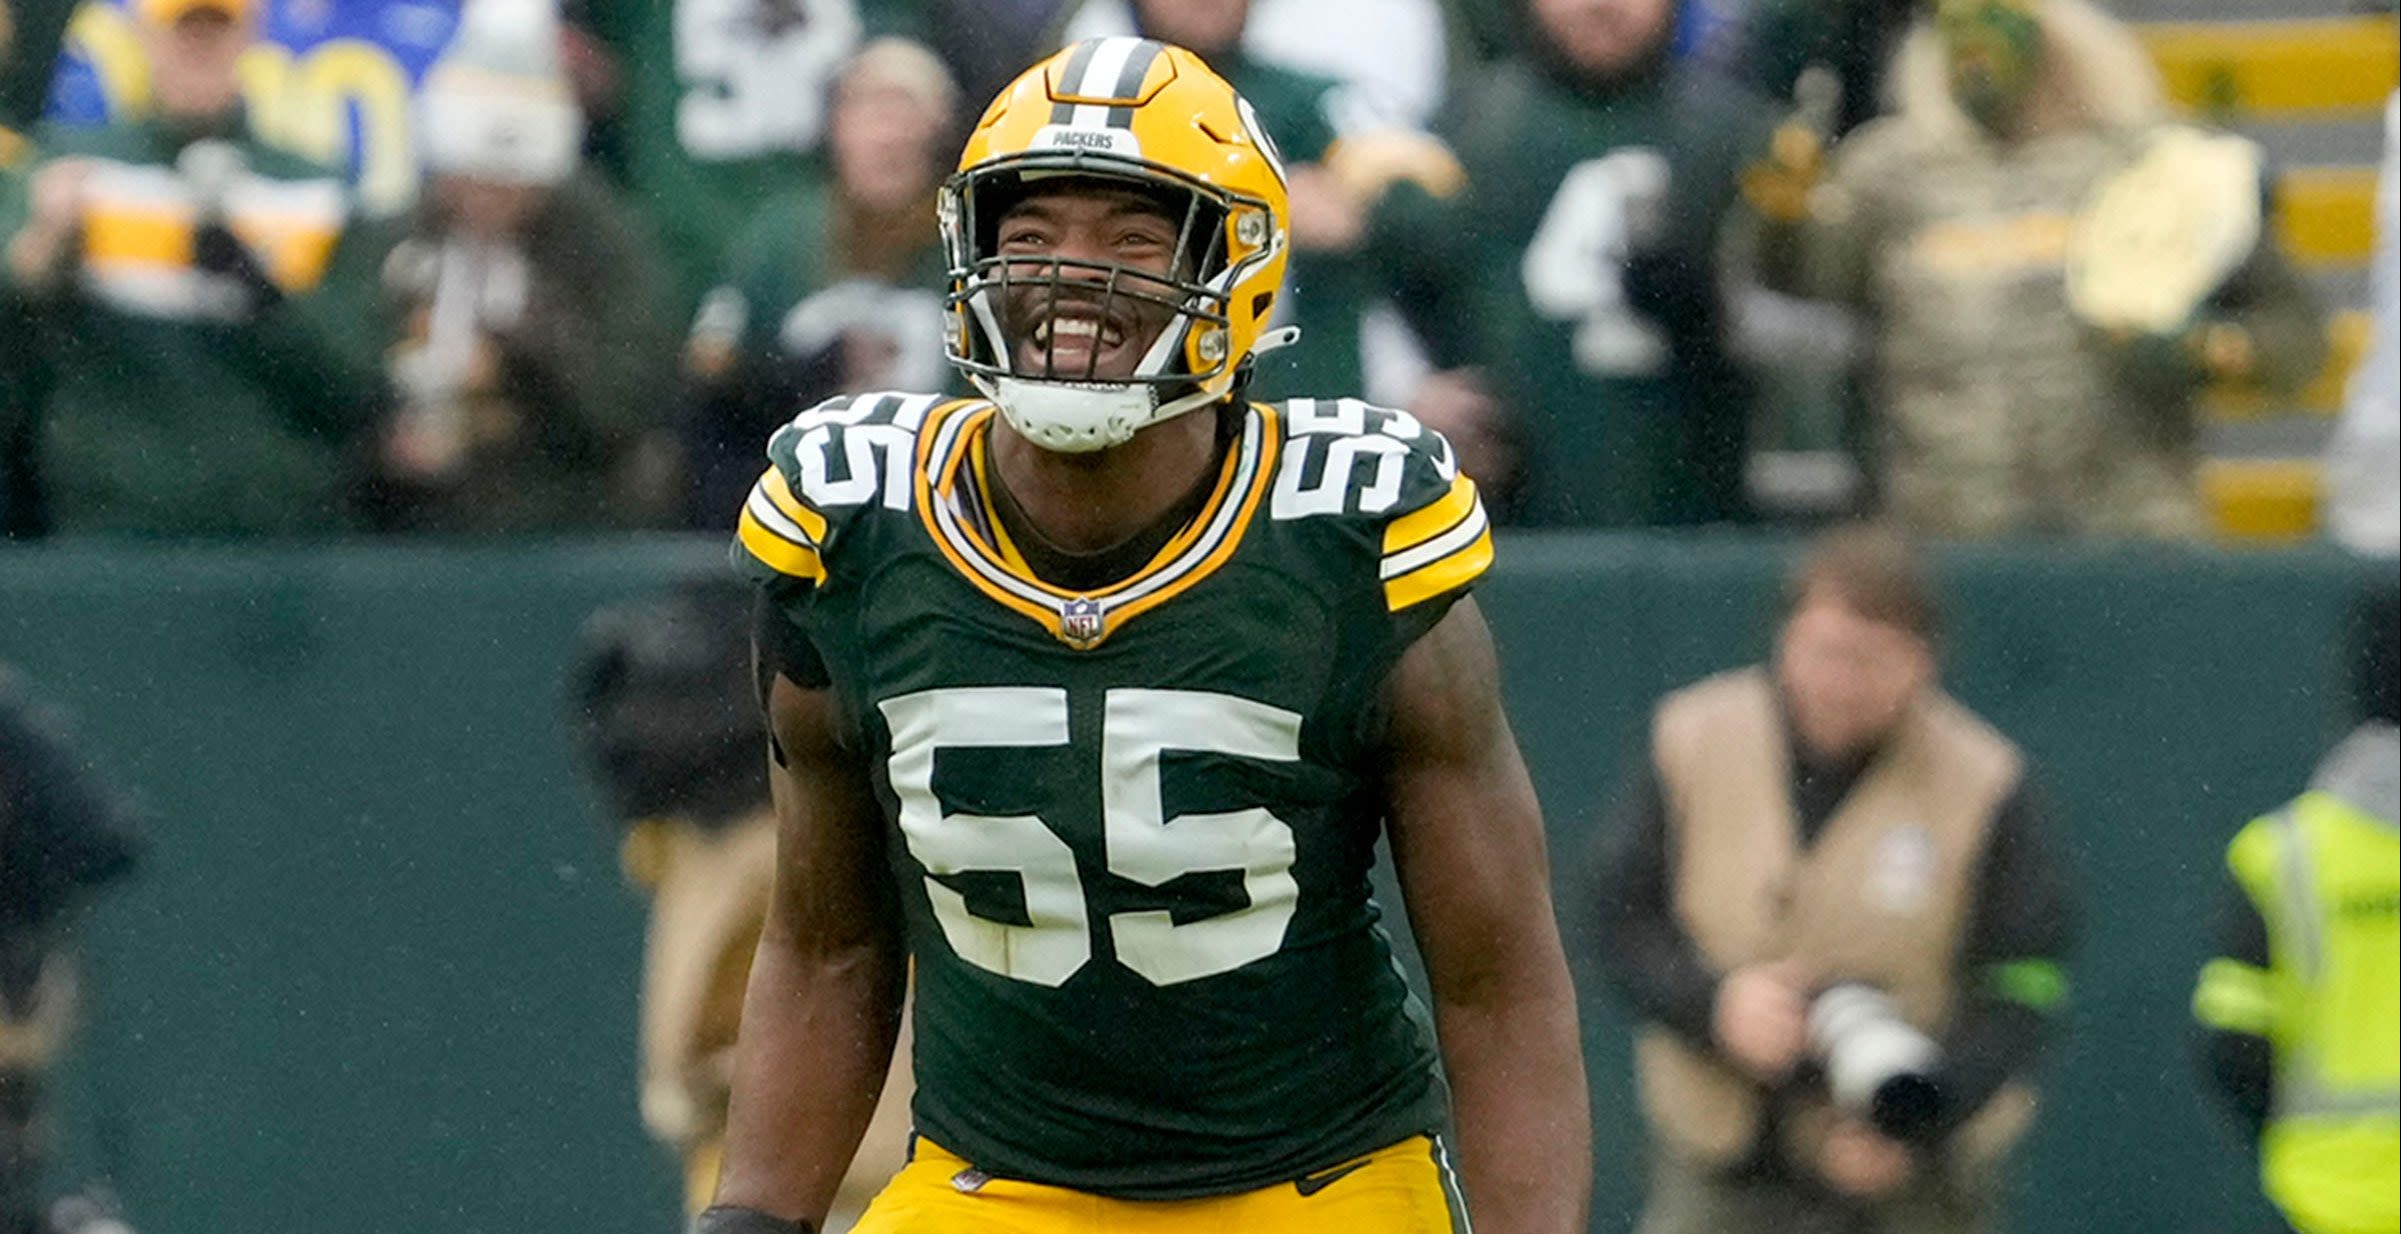 Following injury scare, Packers edge rusher Kinsgley Enagbare is practicing at OTAs